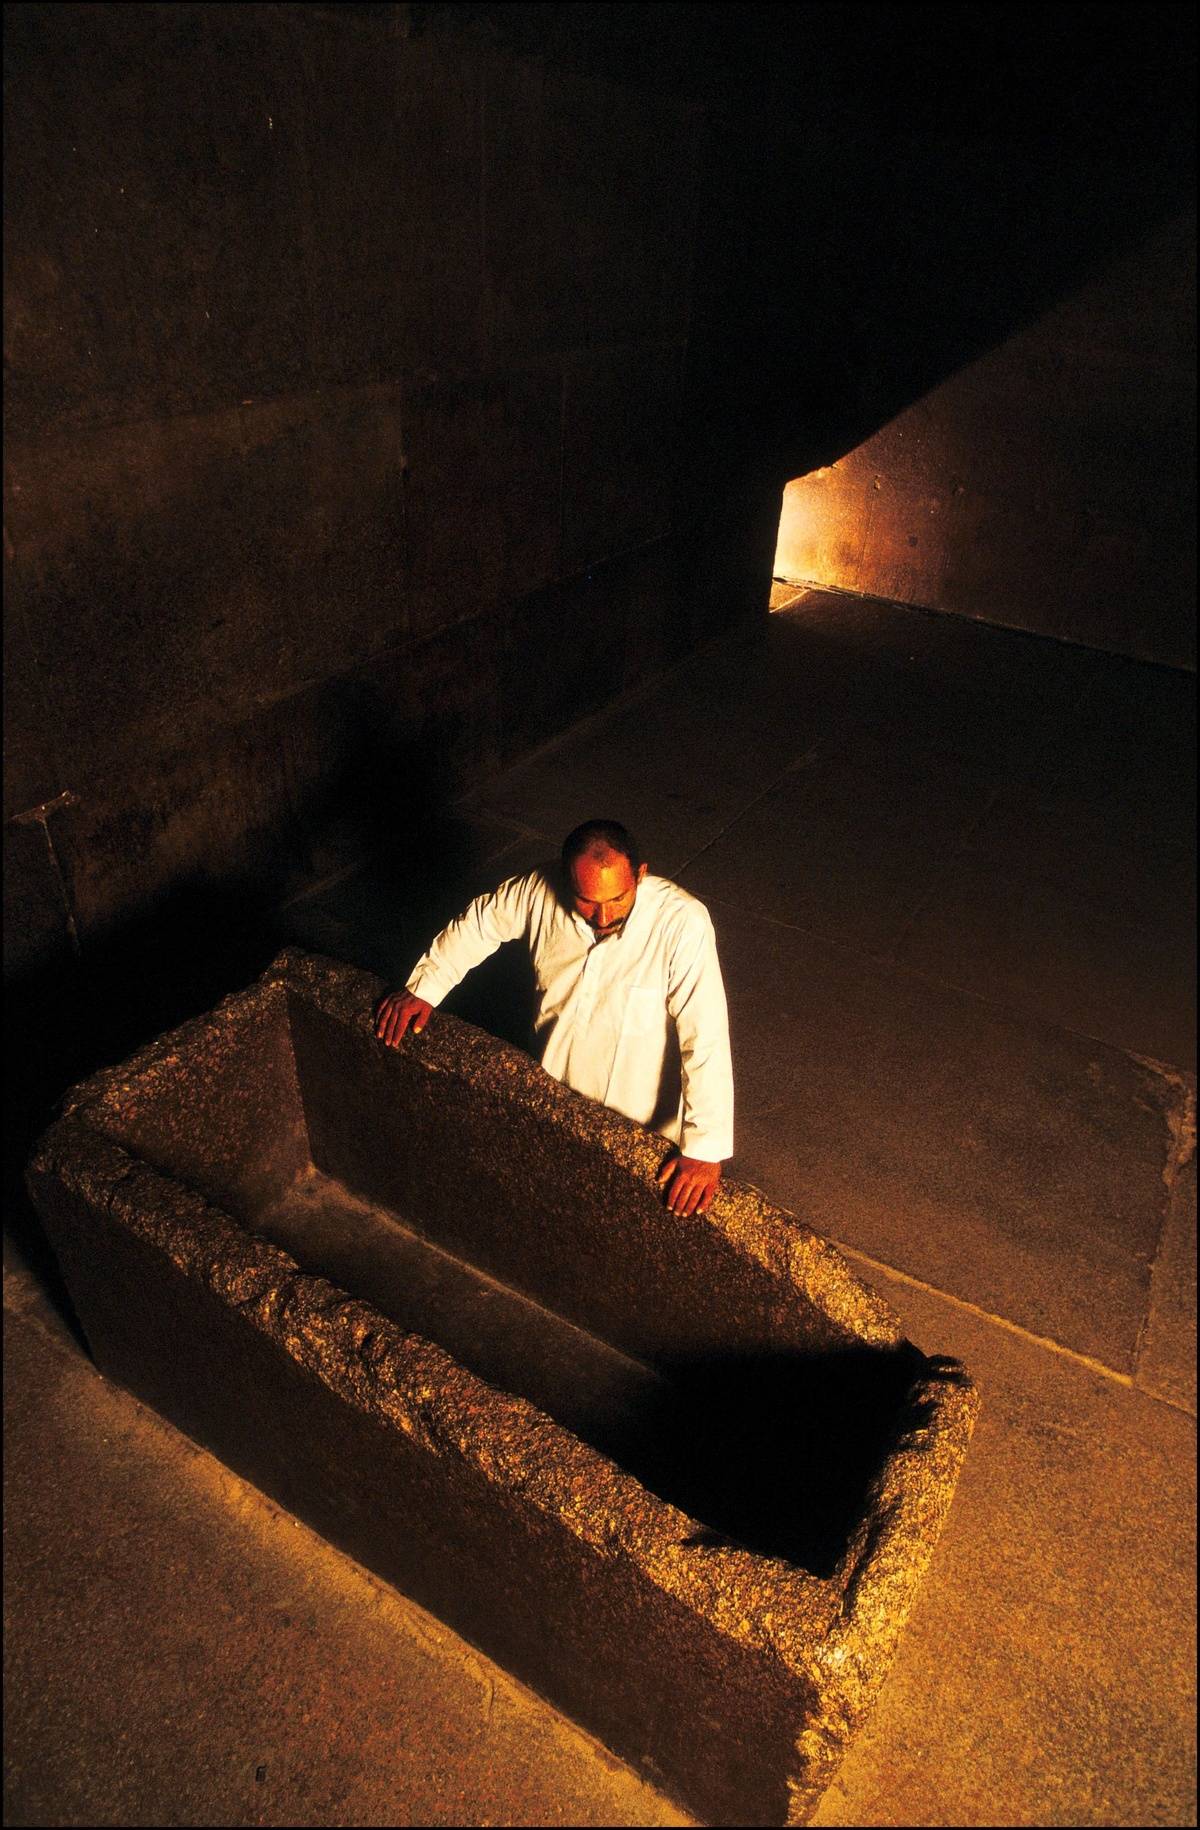 <p>The biggest mystery surrounding the Egyptian pyramids remains the purpose of the Great Pyramid at Giza. The structure has been investigated countless times, and a mummy has never been discovered. When first explored by Arabs in 820 AD, the only thing found was a granite box known as the "coffer."</p> <p>This lack of bodies contradicts the mainstream theory that pyramids were tombs to provide pharaohs and eternal resting place. If the Great Pyramid is not a tomb, then what is it? Someday maybe the mystery will be solved, until then we'll enjoy the guessing game!</p>